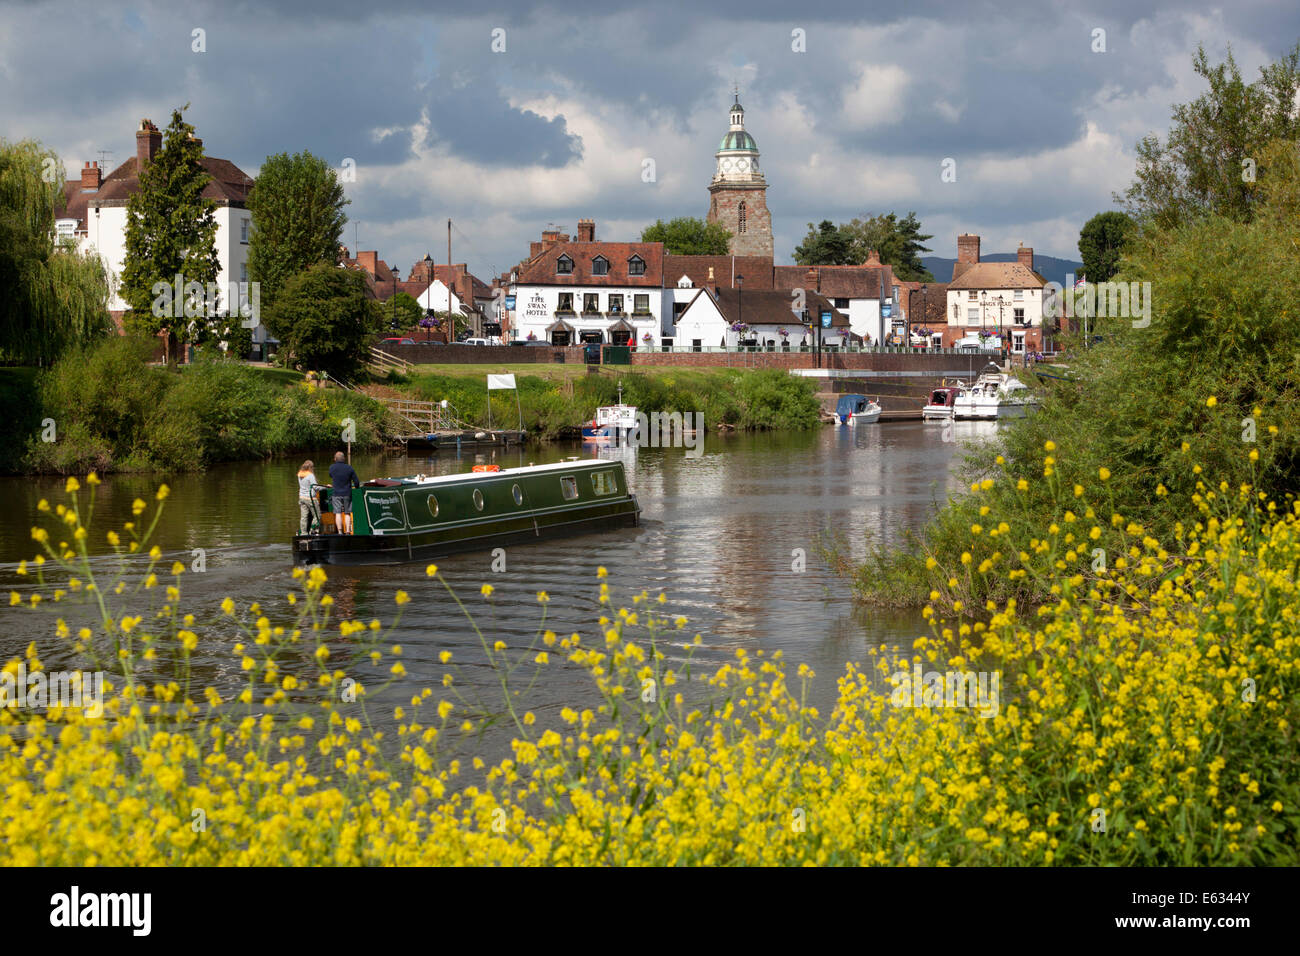 The Pepperpot and town on the River Severn, Upton upon Severn, Worcestershire, England, United Kingdom, Europe Stock Photo